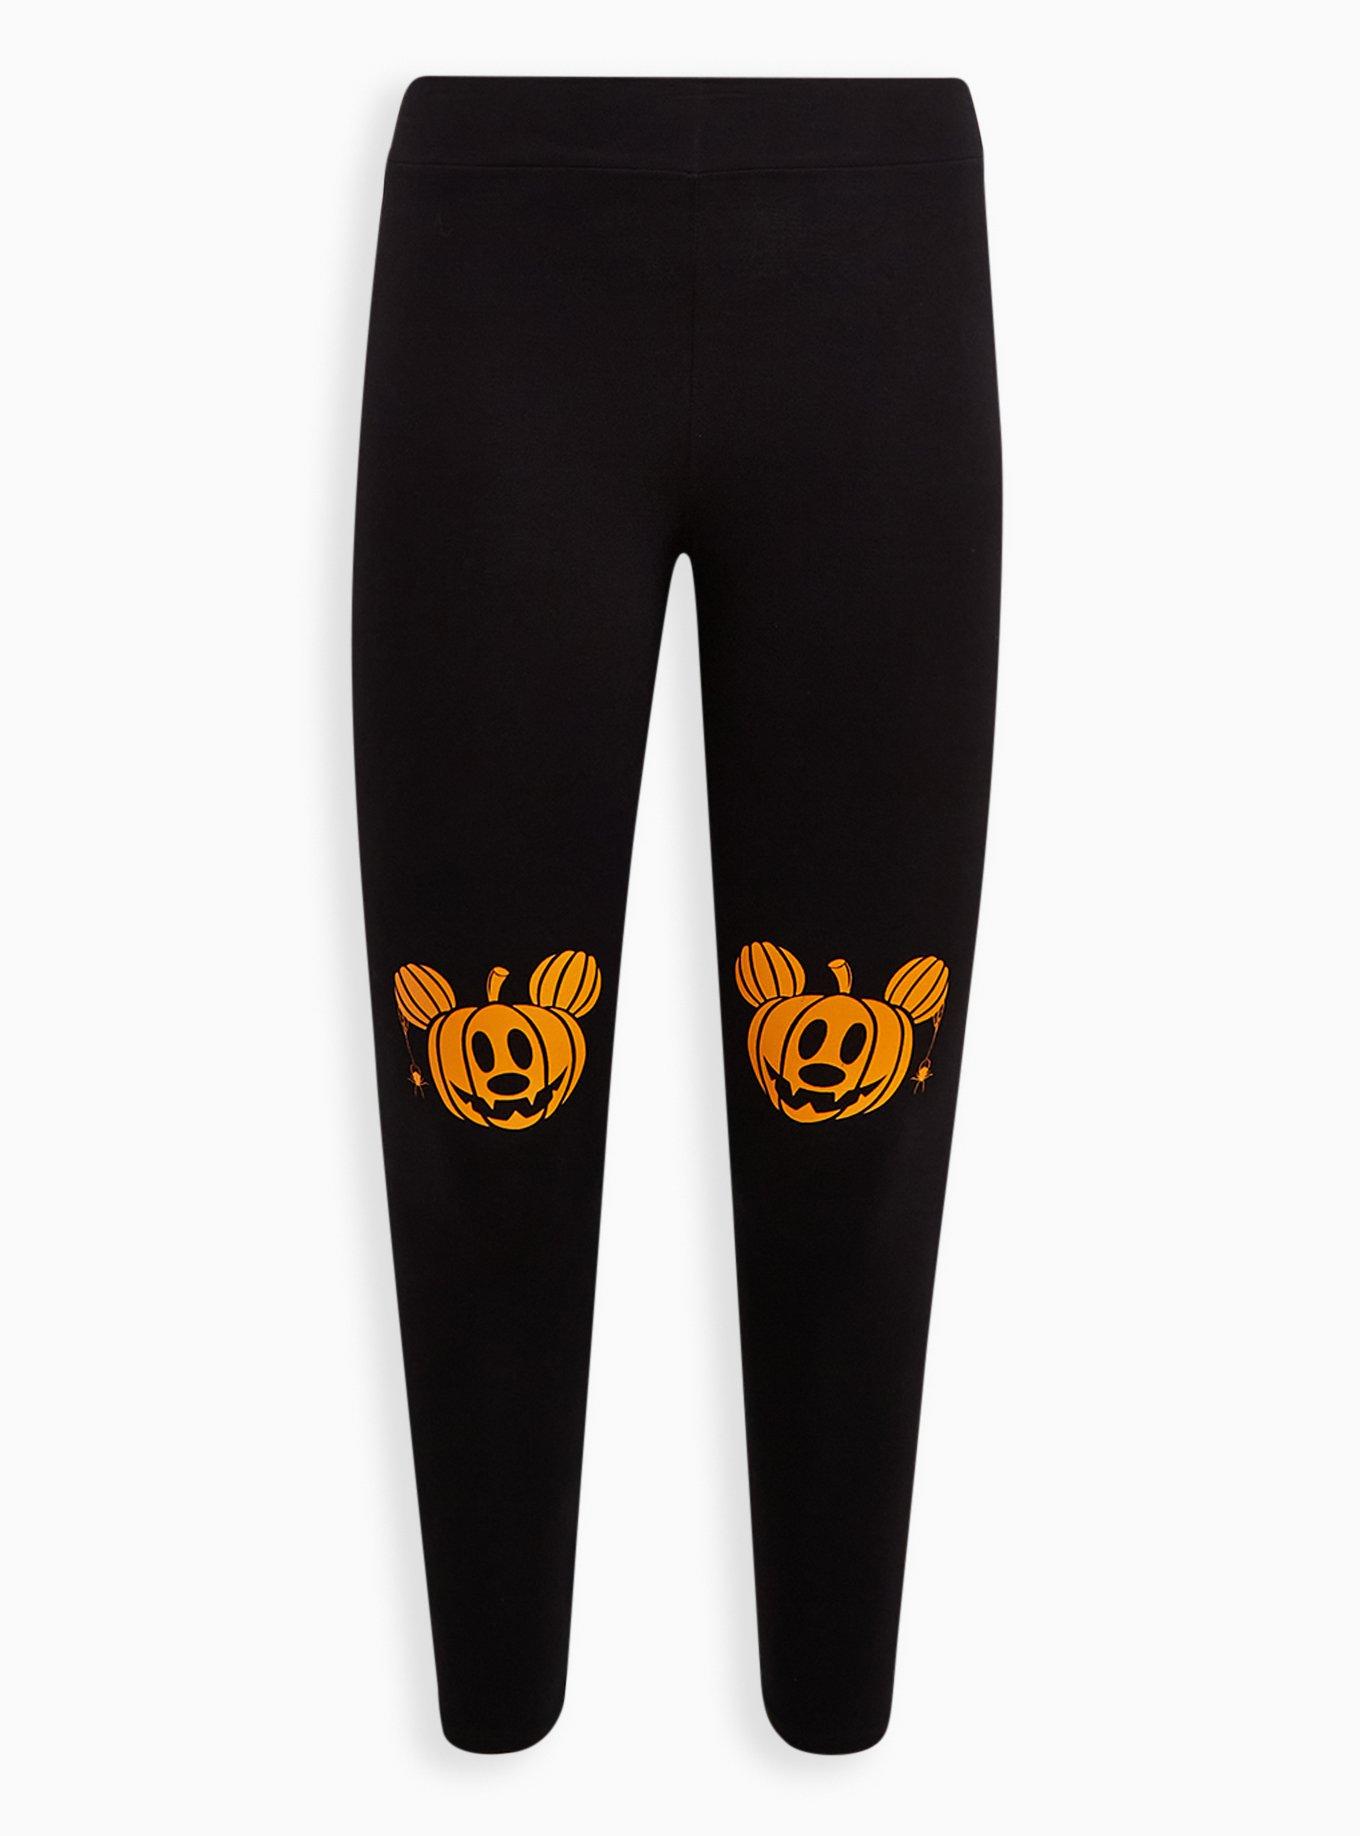 Sport Leggings - Mickey Mouse & the Easter Bunny Costumes